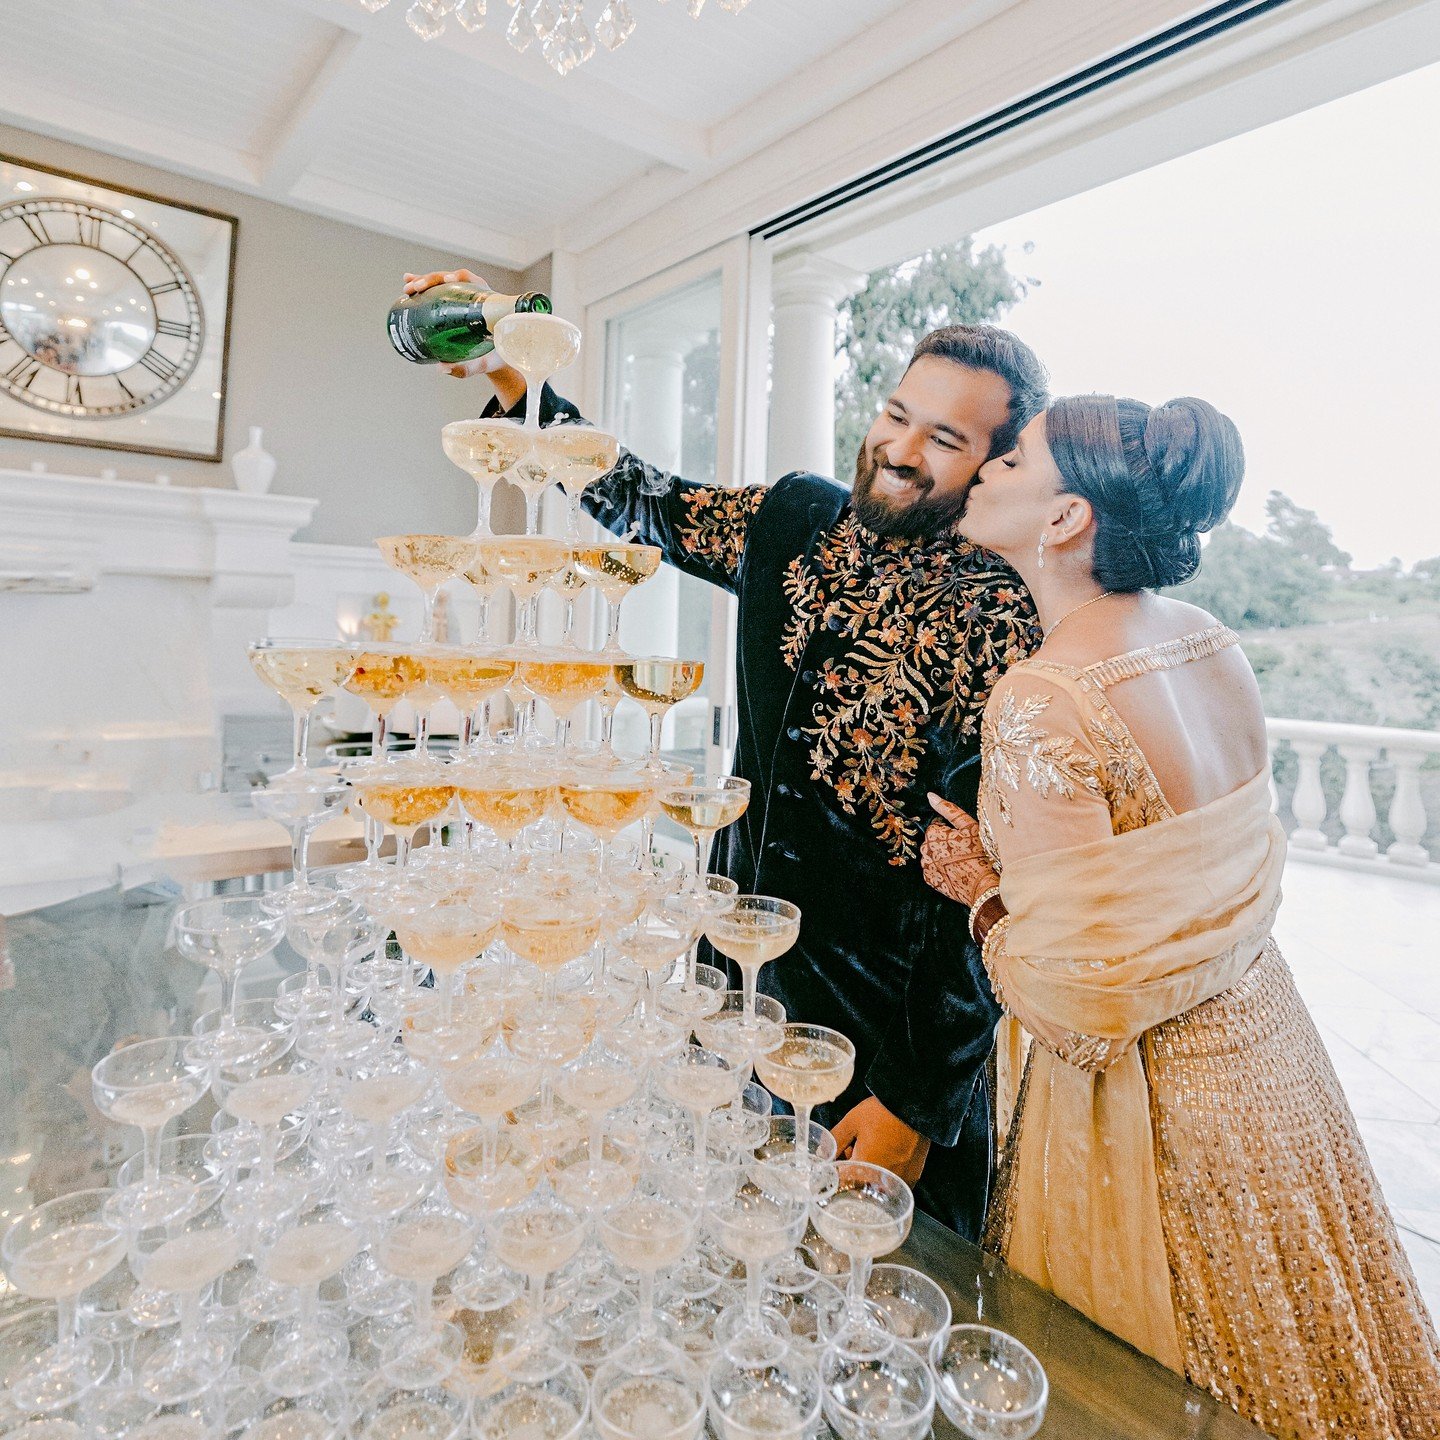 Marriage is a delicate balance, just like these champagne glasses

MYTH OR FACT -
I was once told that the coup champagne glasses pictured here were shaped after the delicate breast of Marie Antoinette who was renowned for her luxurious lifestyle 🍾